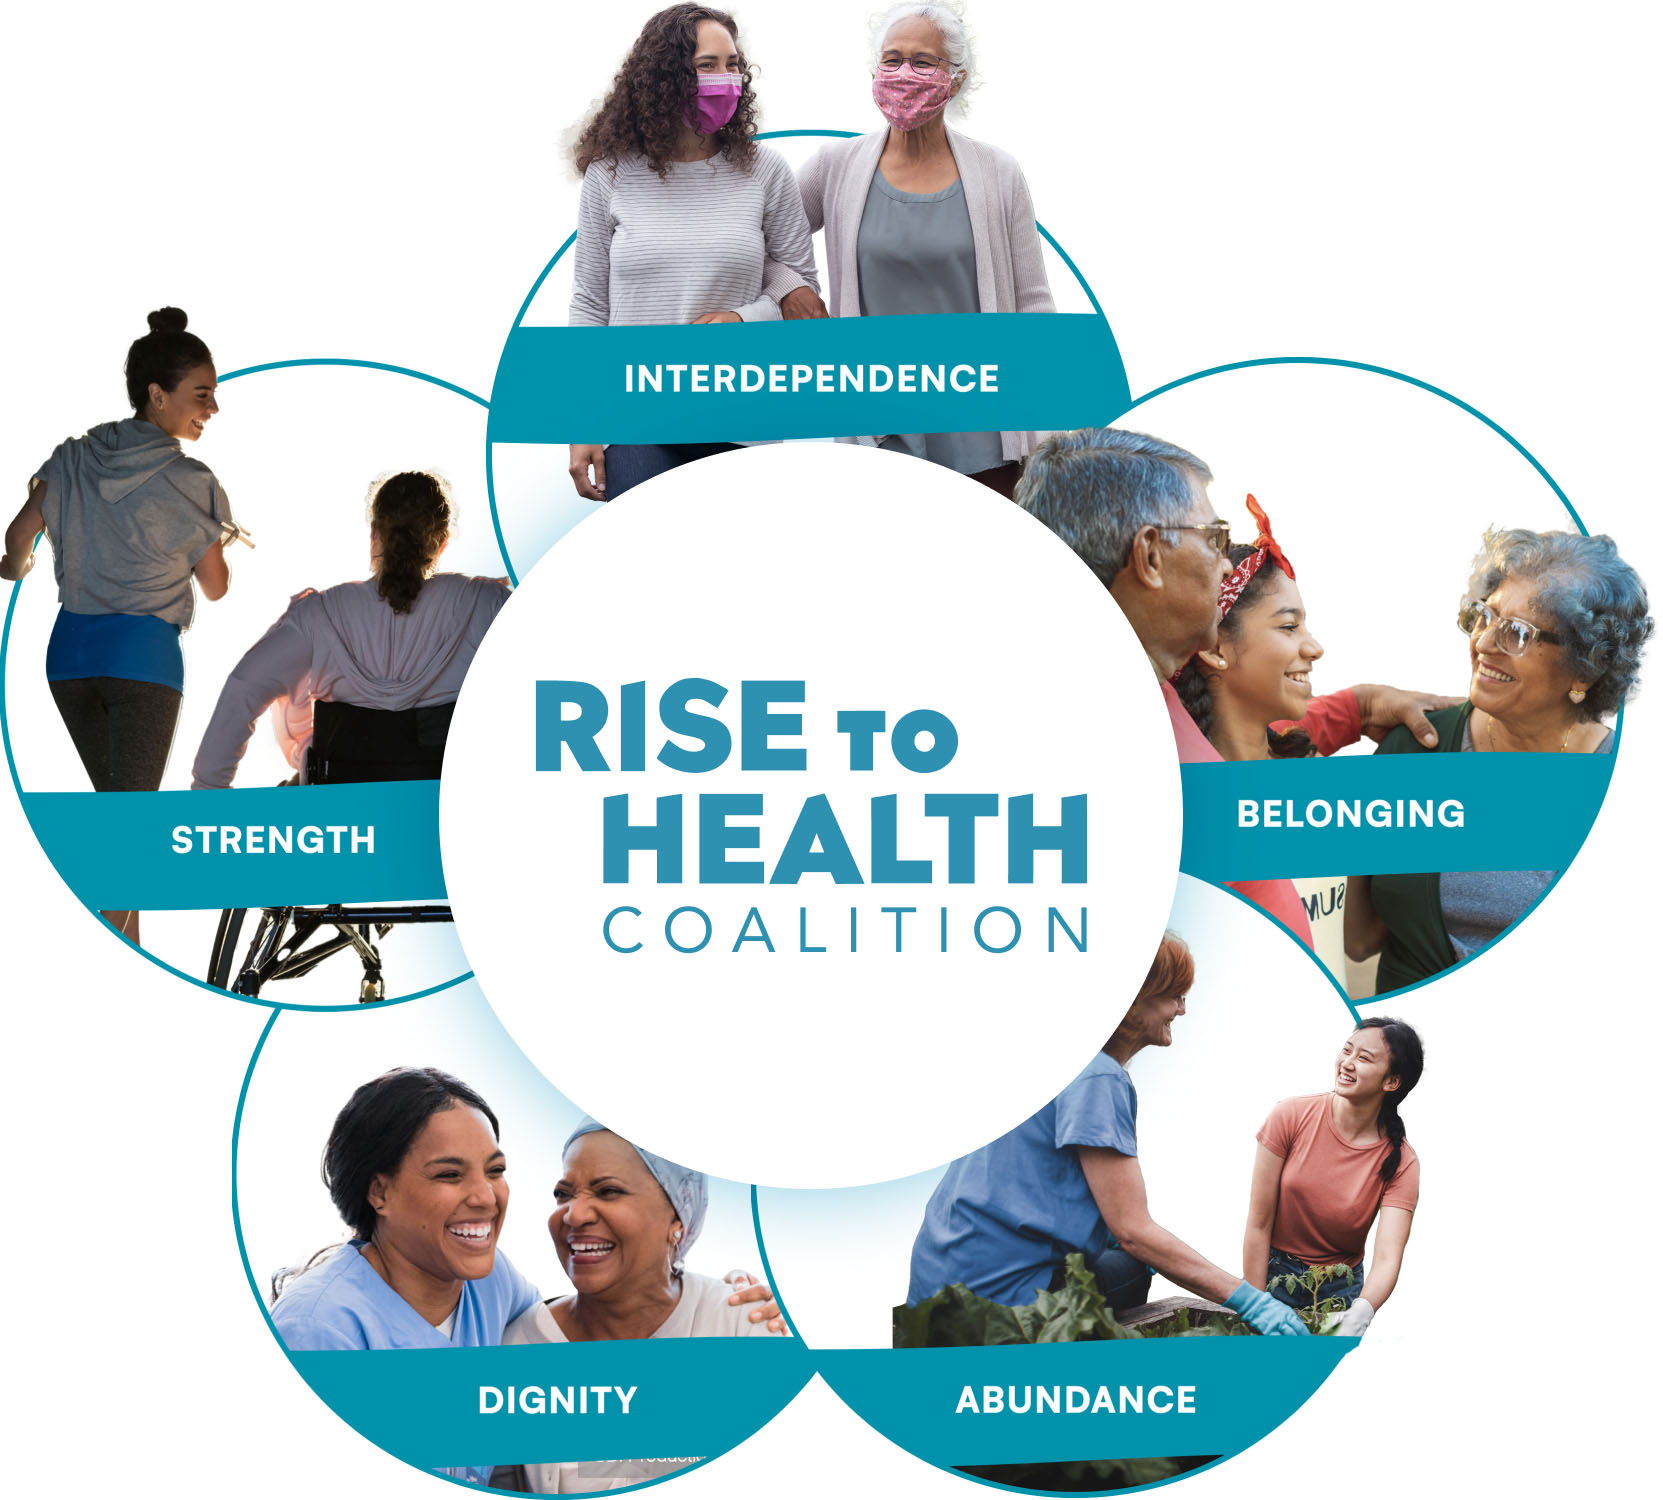 Rise to Health Coalition Values